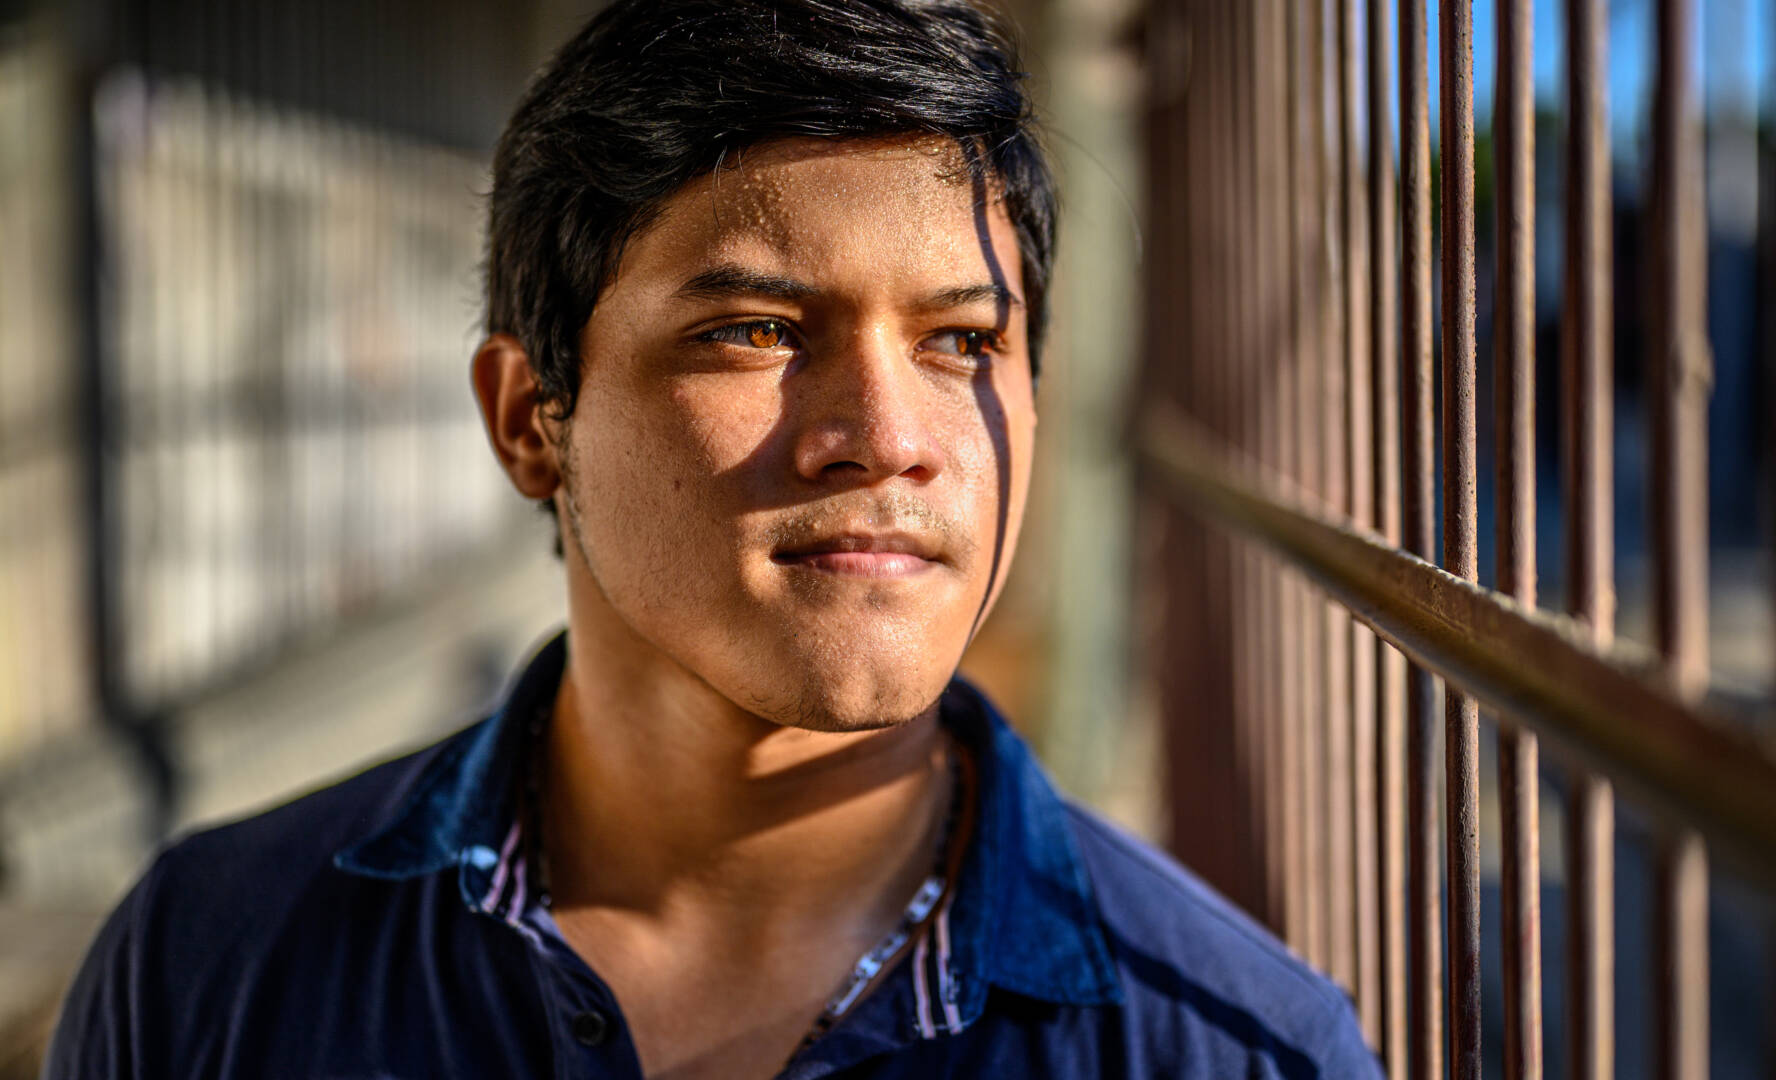 World Vision offers training to pastors so they can make a difference in the lives of their youth just as Pastor Raul David Vasquez did in Jordy’s life.